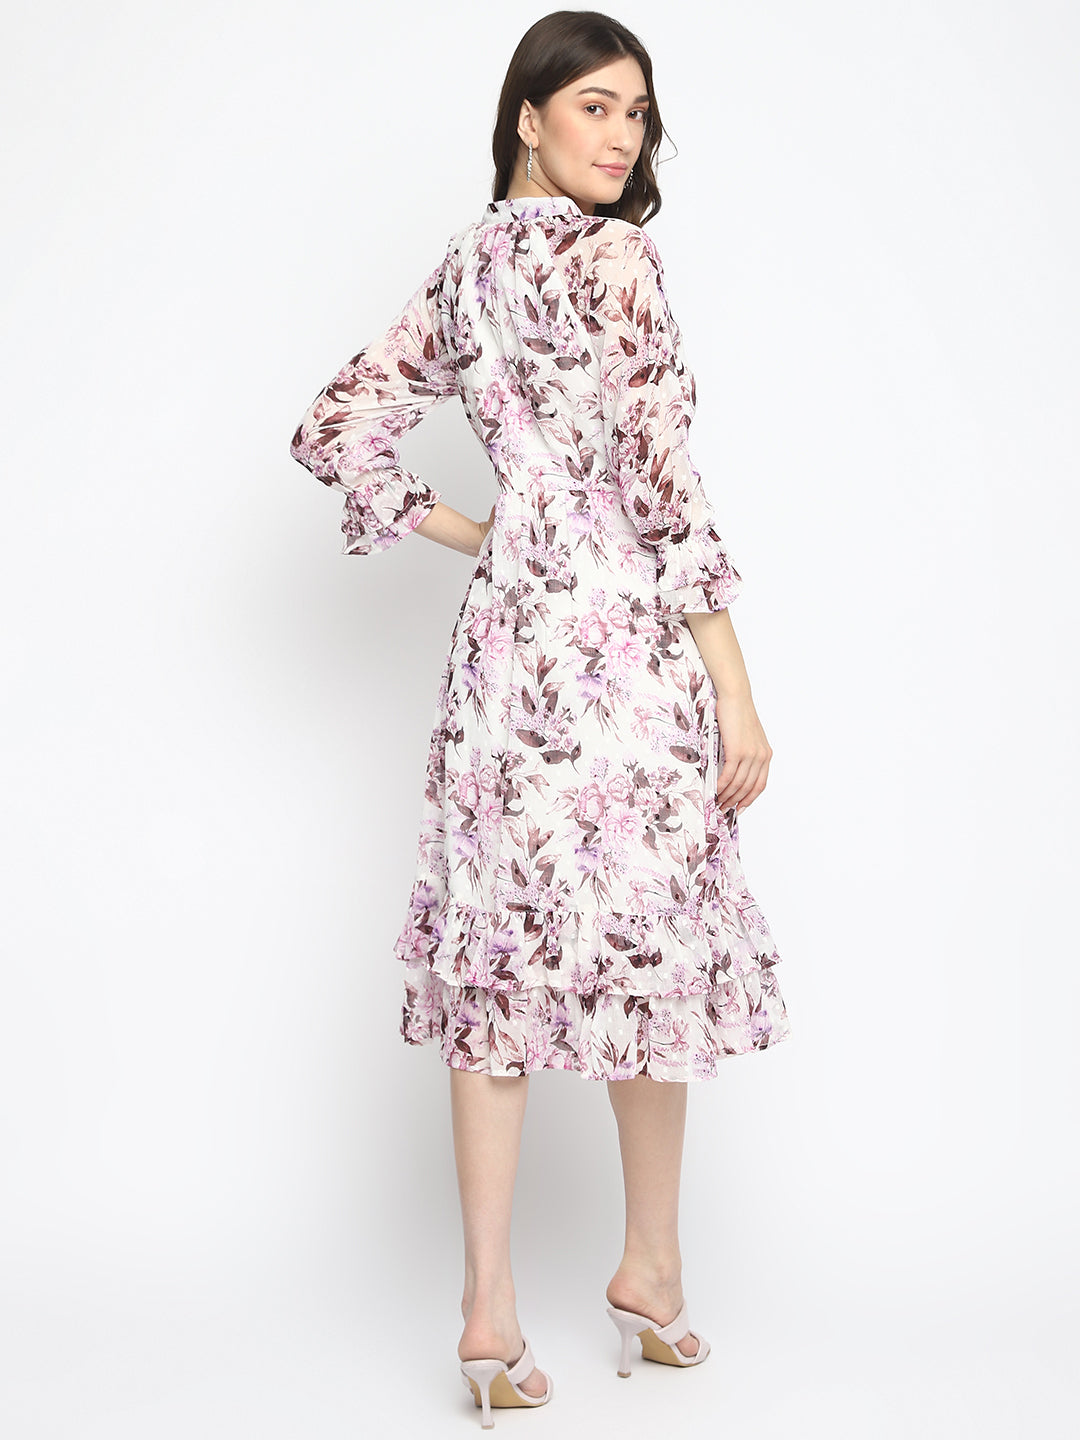 Lilac 3/4 Sleeve Printed Maxi Dress With Ruffles